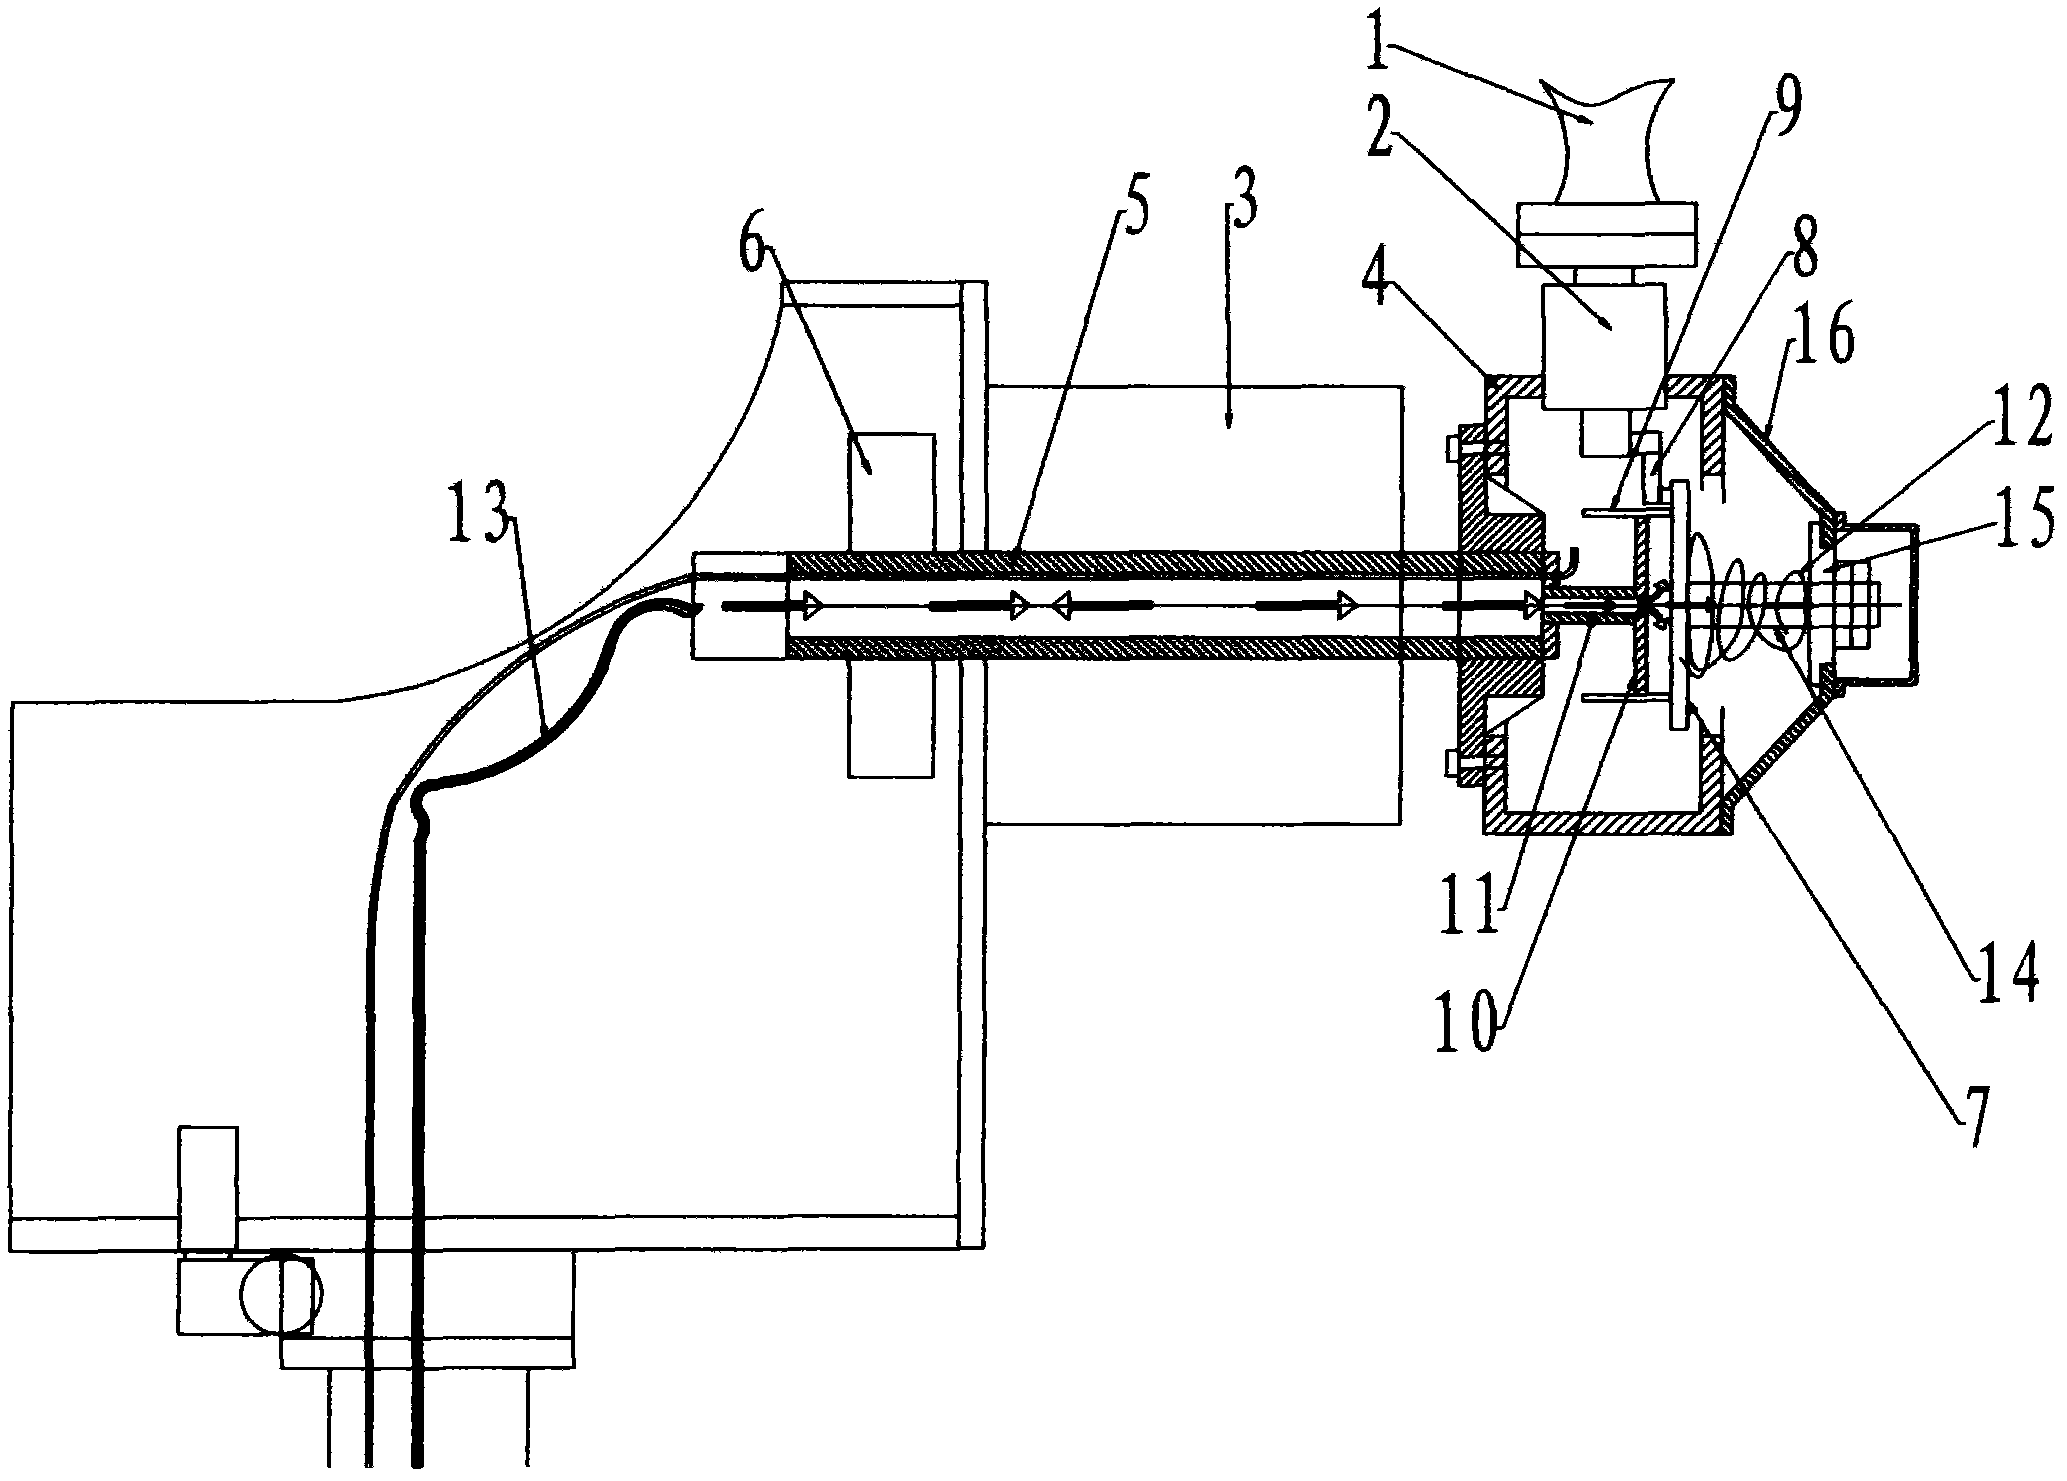 Pneumatic variable pitch brake system of wind power generator